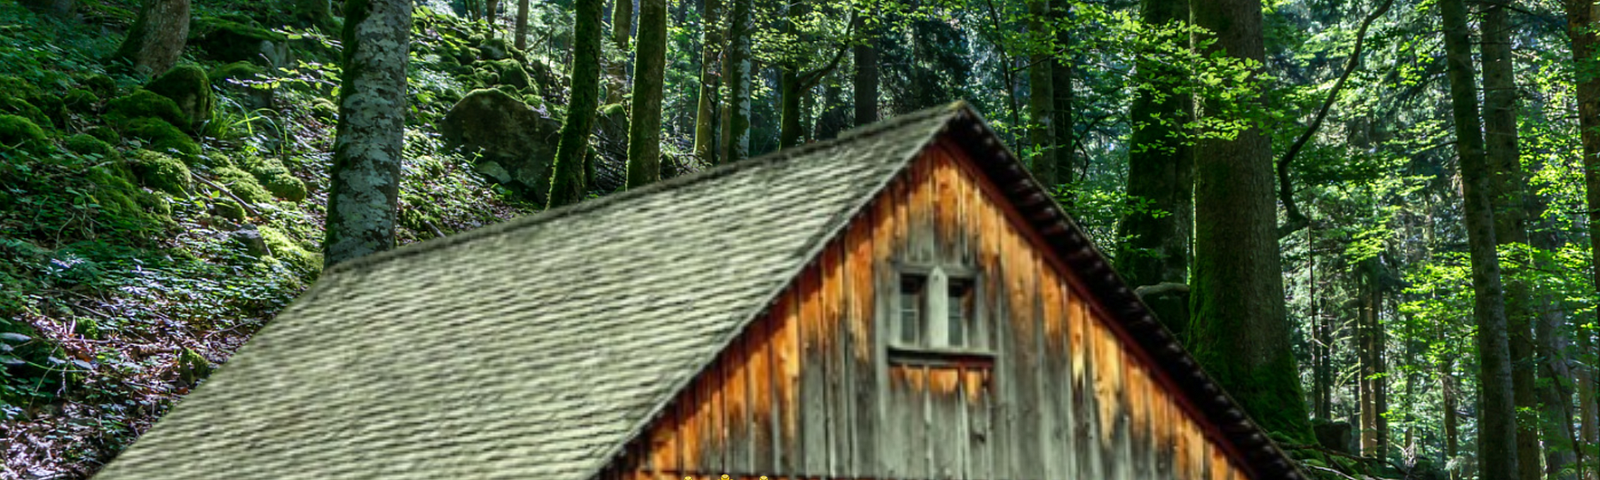 A wood cabin in the Black Forest. The House of Dwarves.